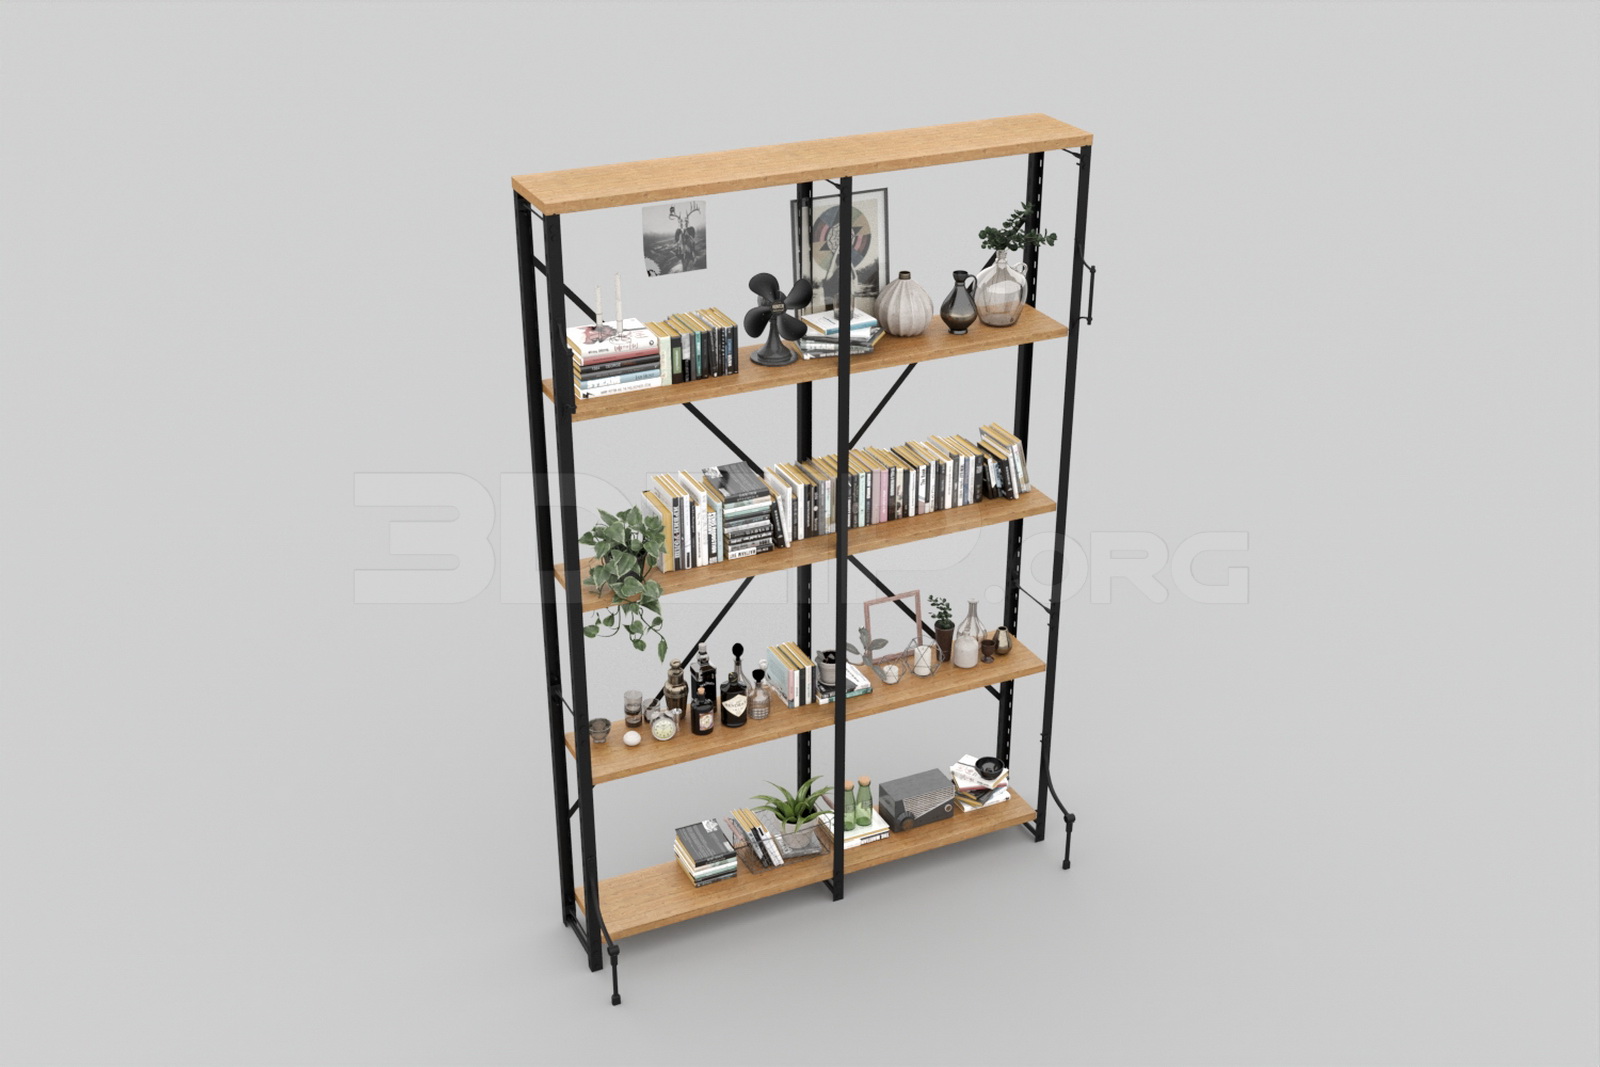 720. Download Free Bookcase Model By Viet Hoang